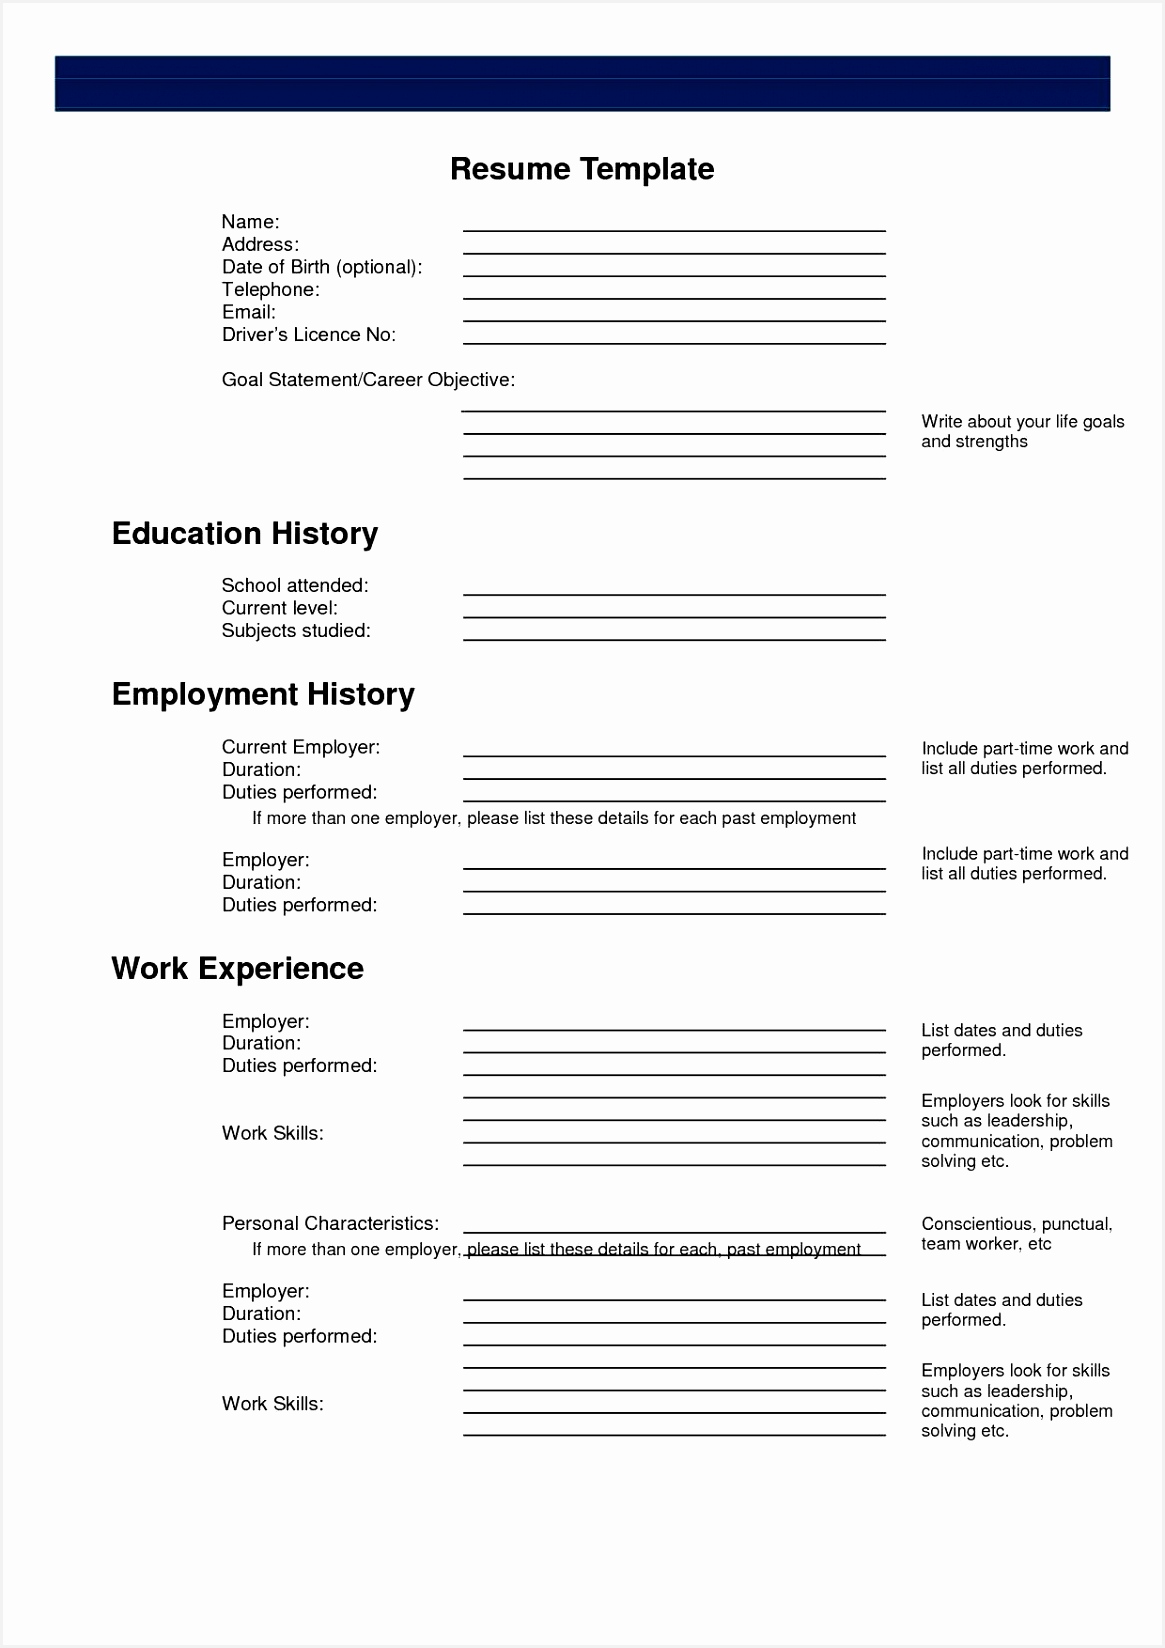 Free Resume format Awesome Best Pr Resume Template Elegant Dictionary Template 0d Archives s16481165